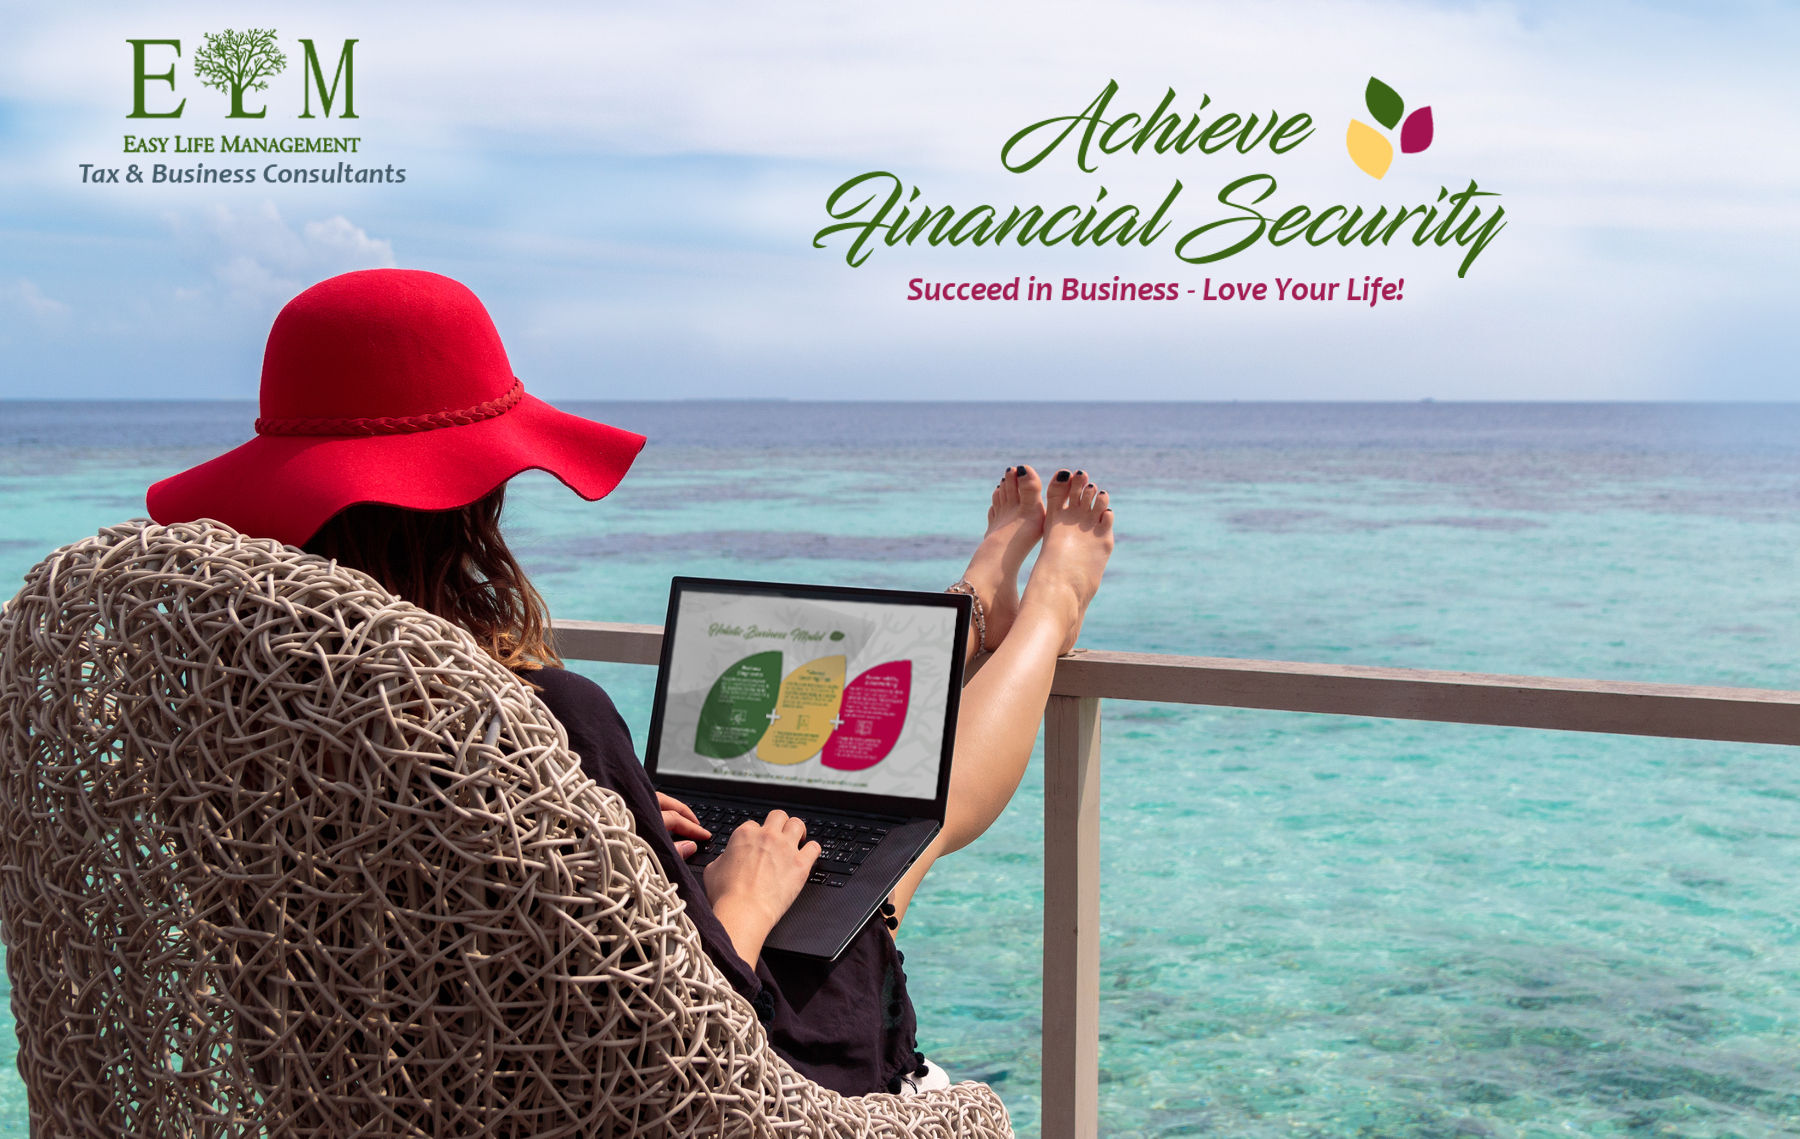 Easy Life Management - Achieve Financial Security